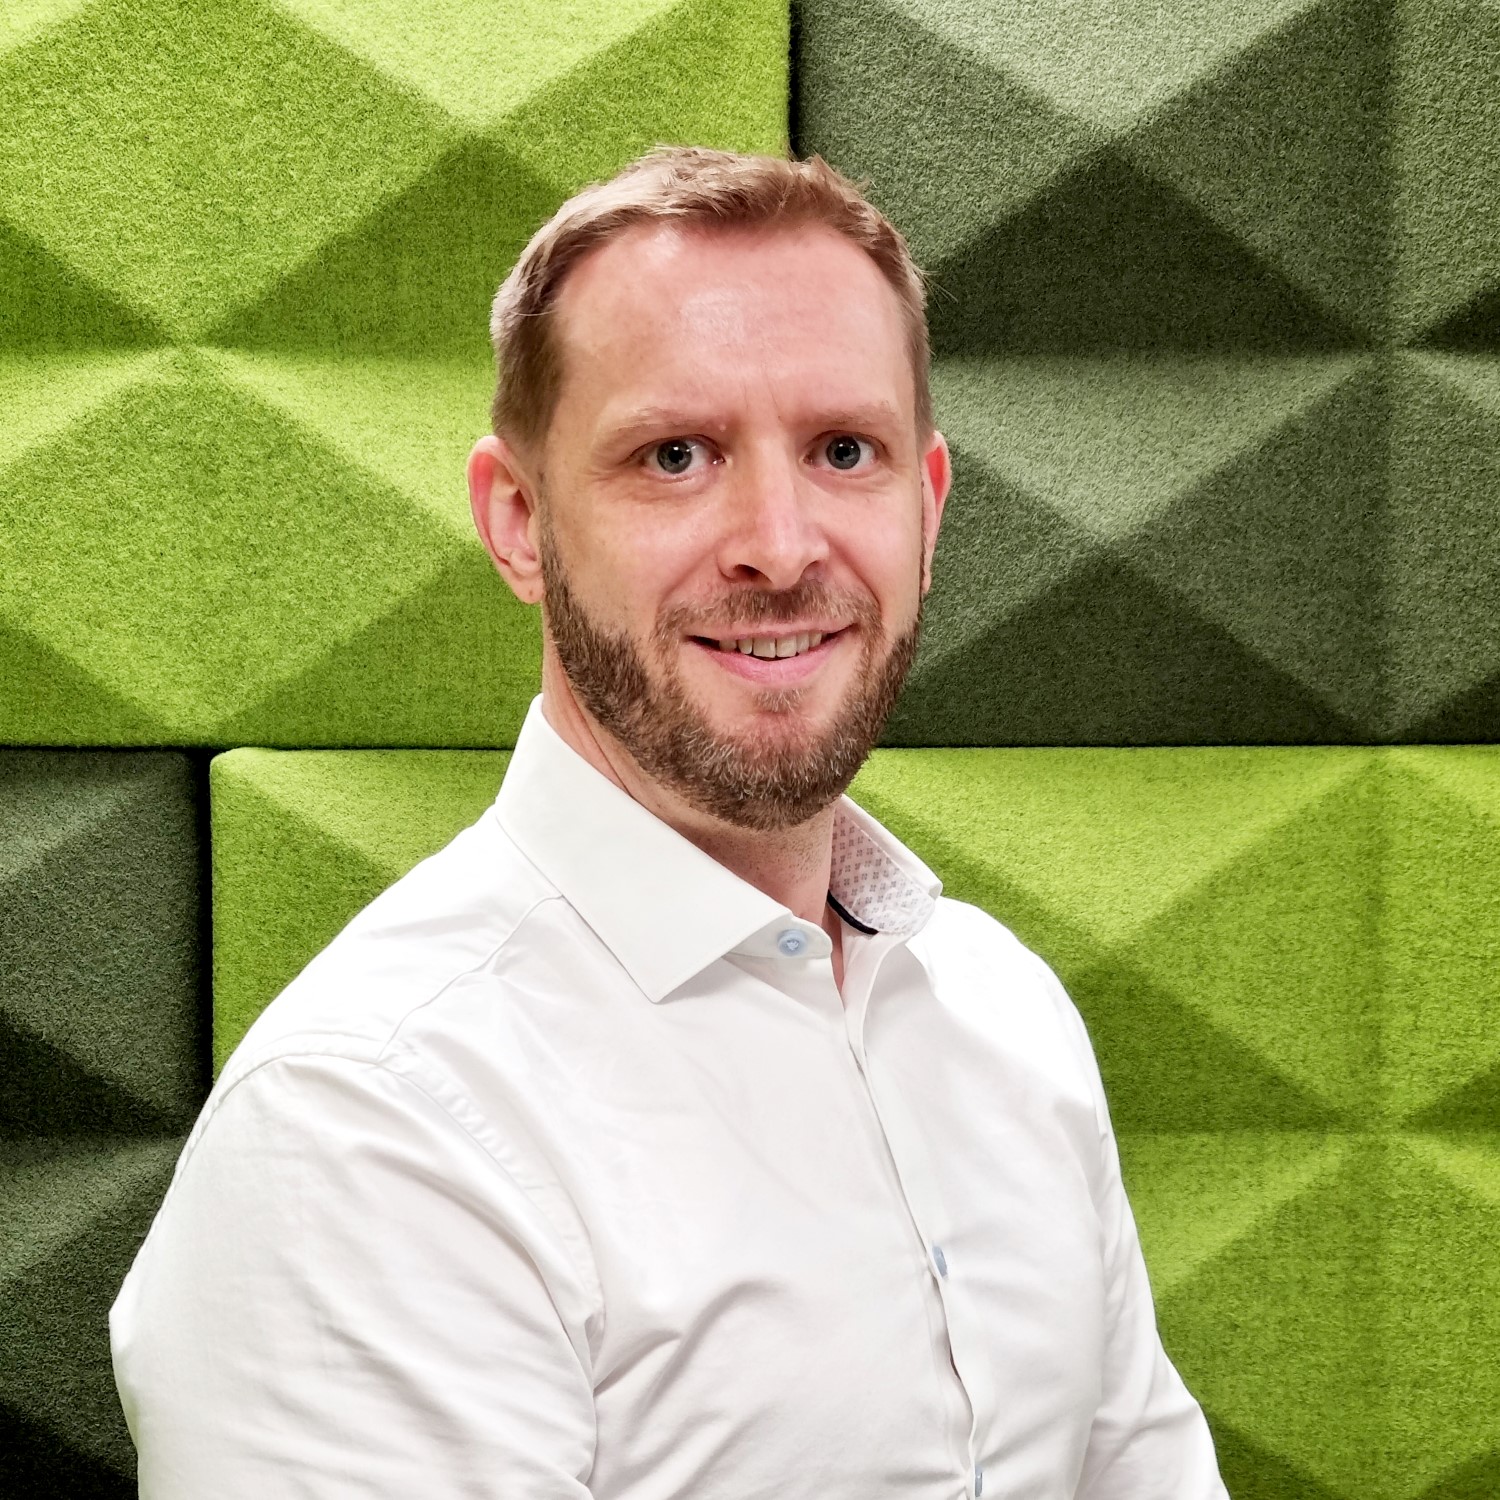 ERA has appointed a new Smart Security Product Manager, as part of continued investment in its smart security offering. 